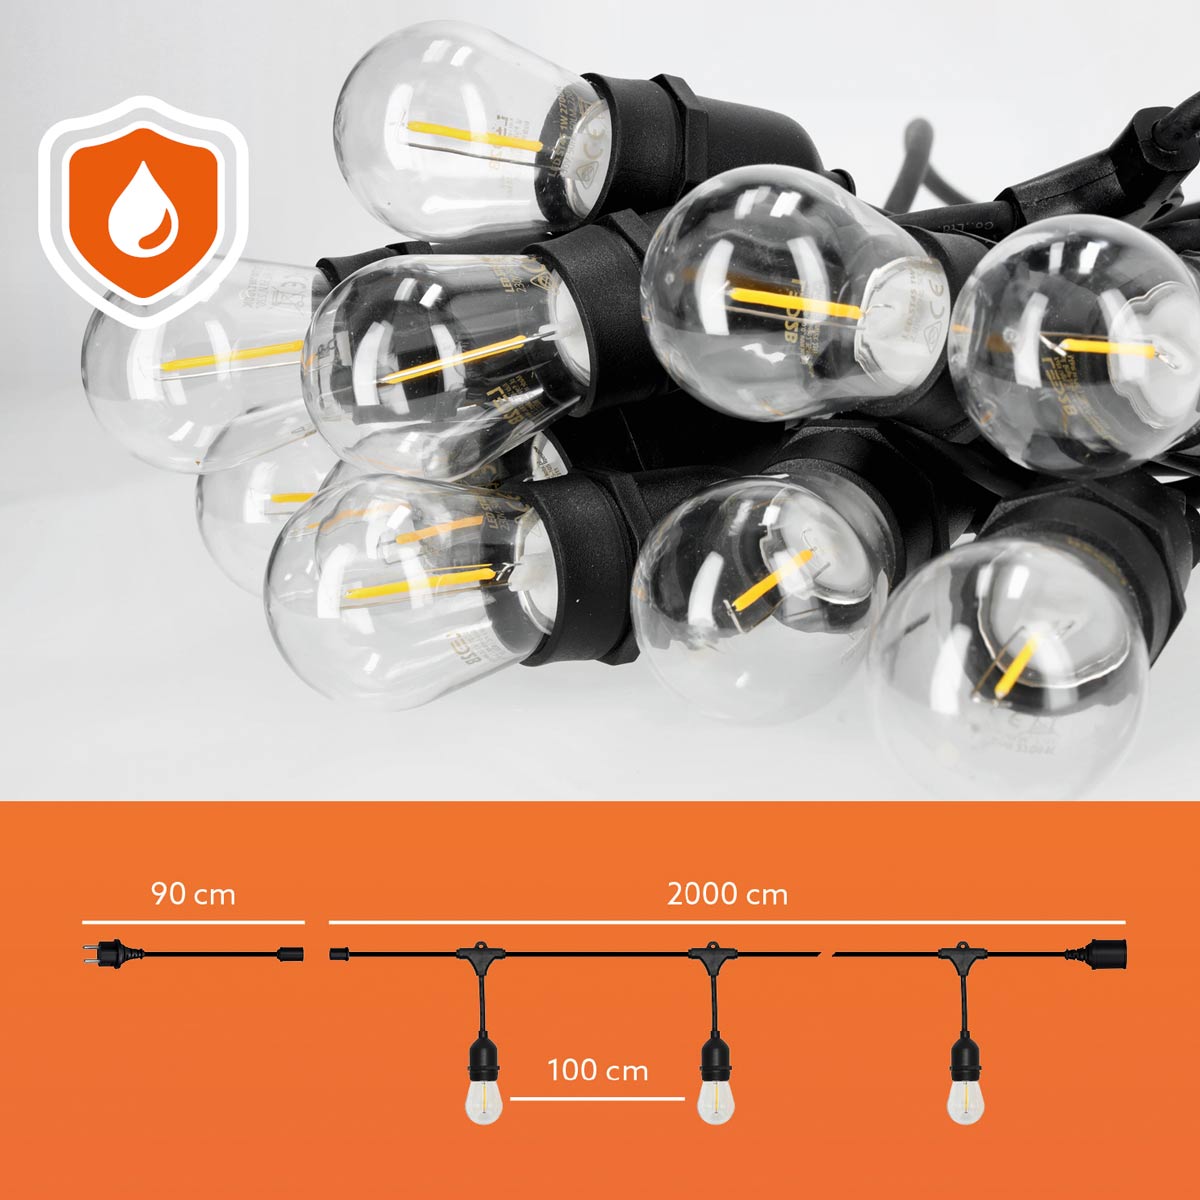 Light chain set MIMOSA2 20m & 20pcs 1W 2700K E27 LED-bulb, IP44 suitable for outdoor use